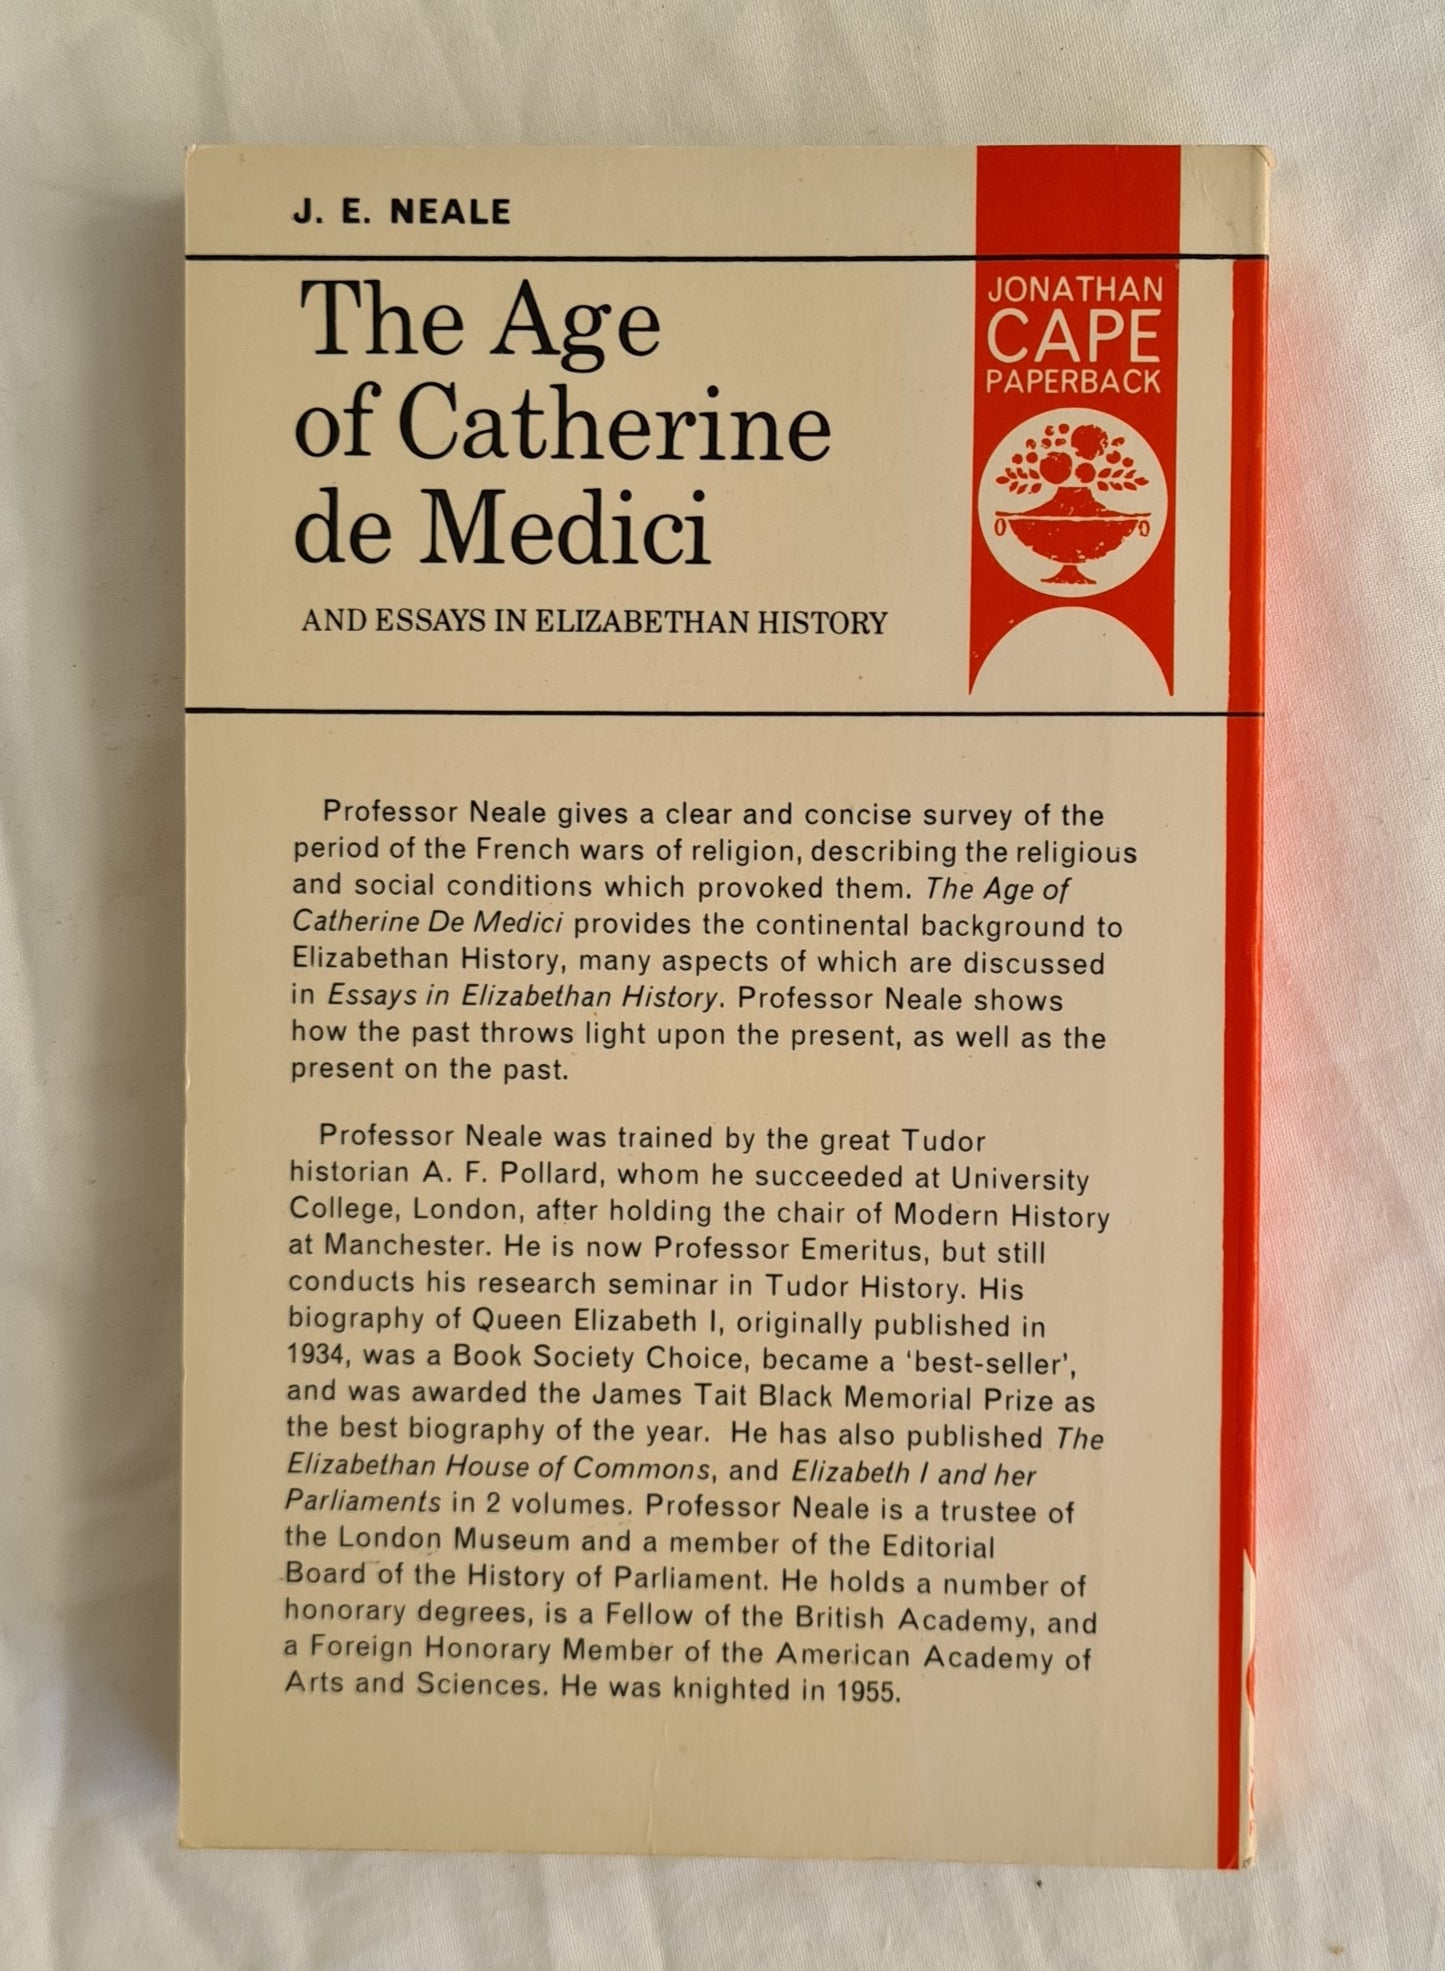 The Age of Catherine de Medici by J. E. Neale